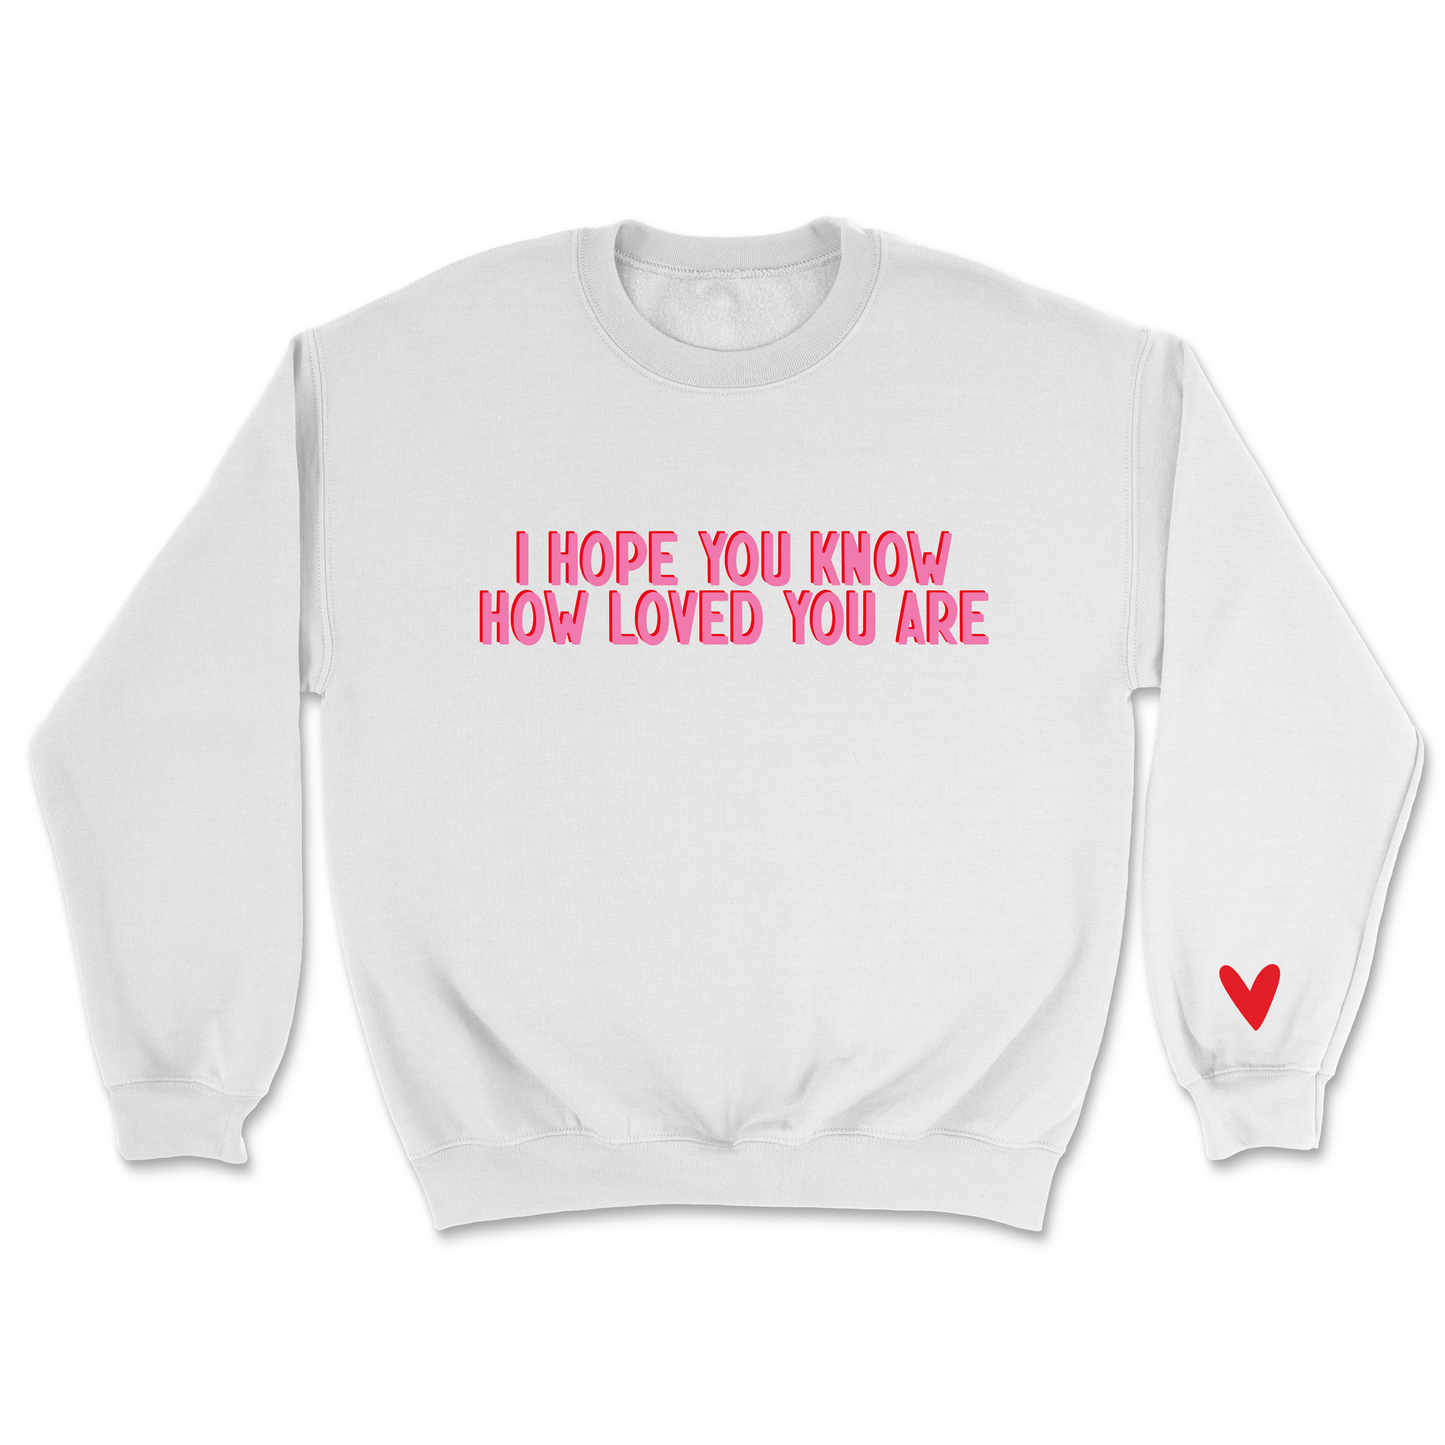 LOVE YOU MORE SWEATER YOUTH AND ADULT